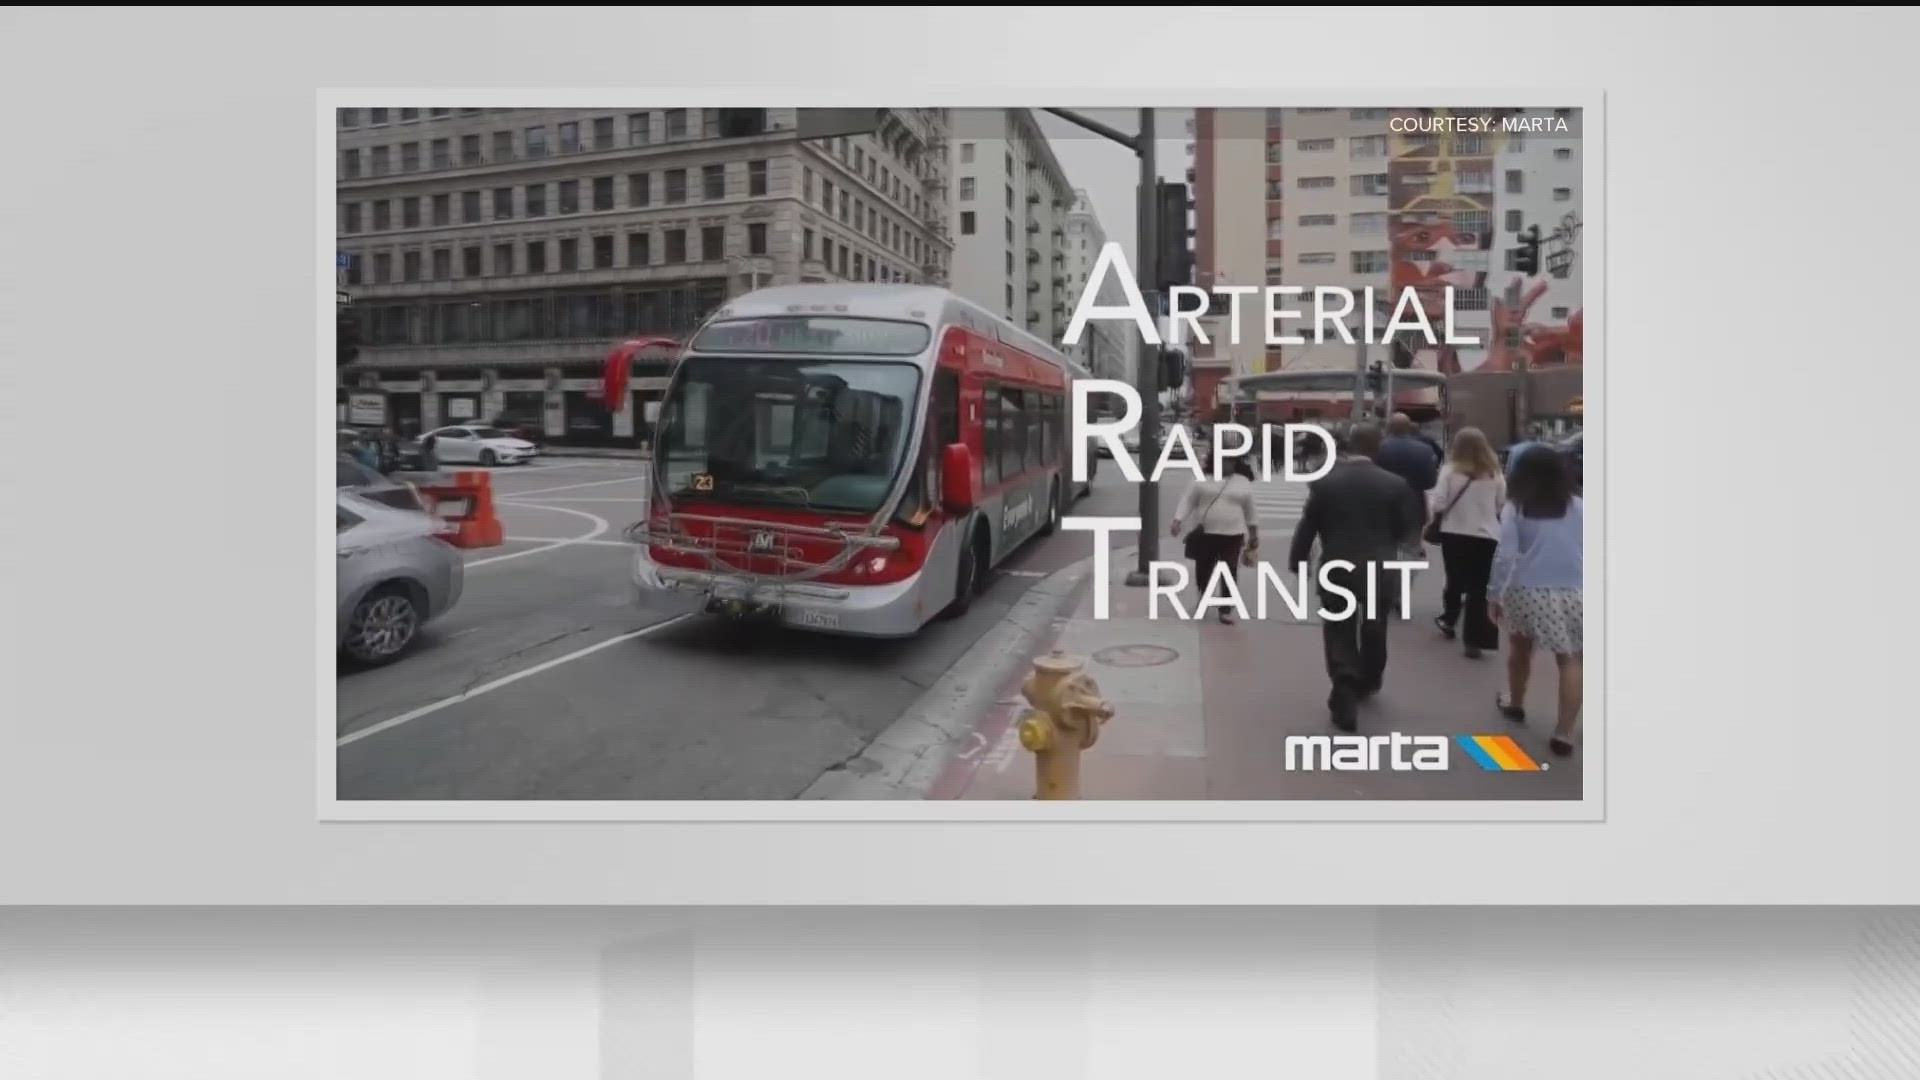 Arterial Rapid Transit (ART) is expected to have shorter wait times, traffic signal priority, queue jump lanes and enhanced bus stops.